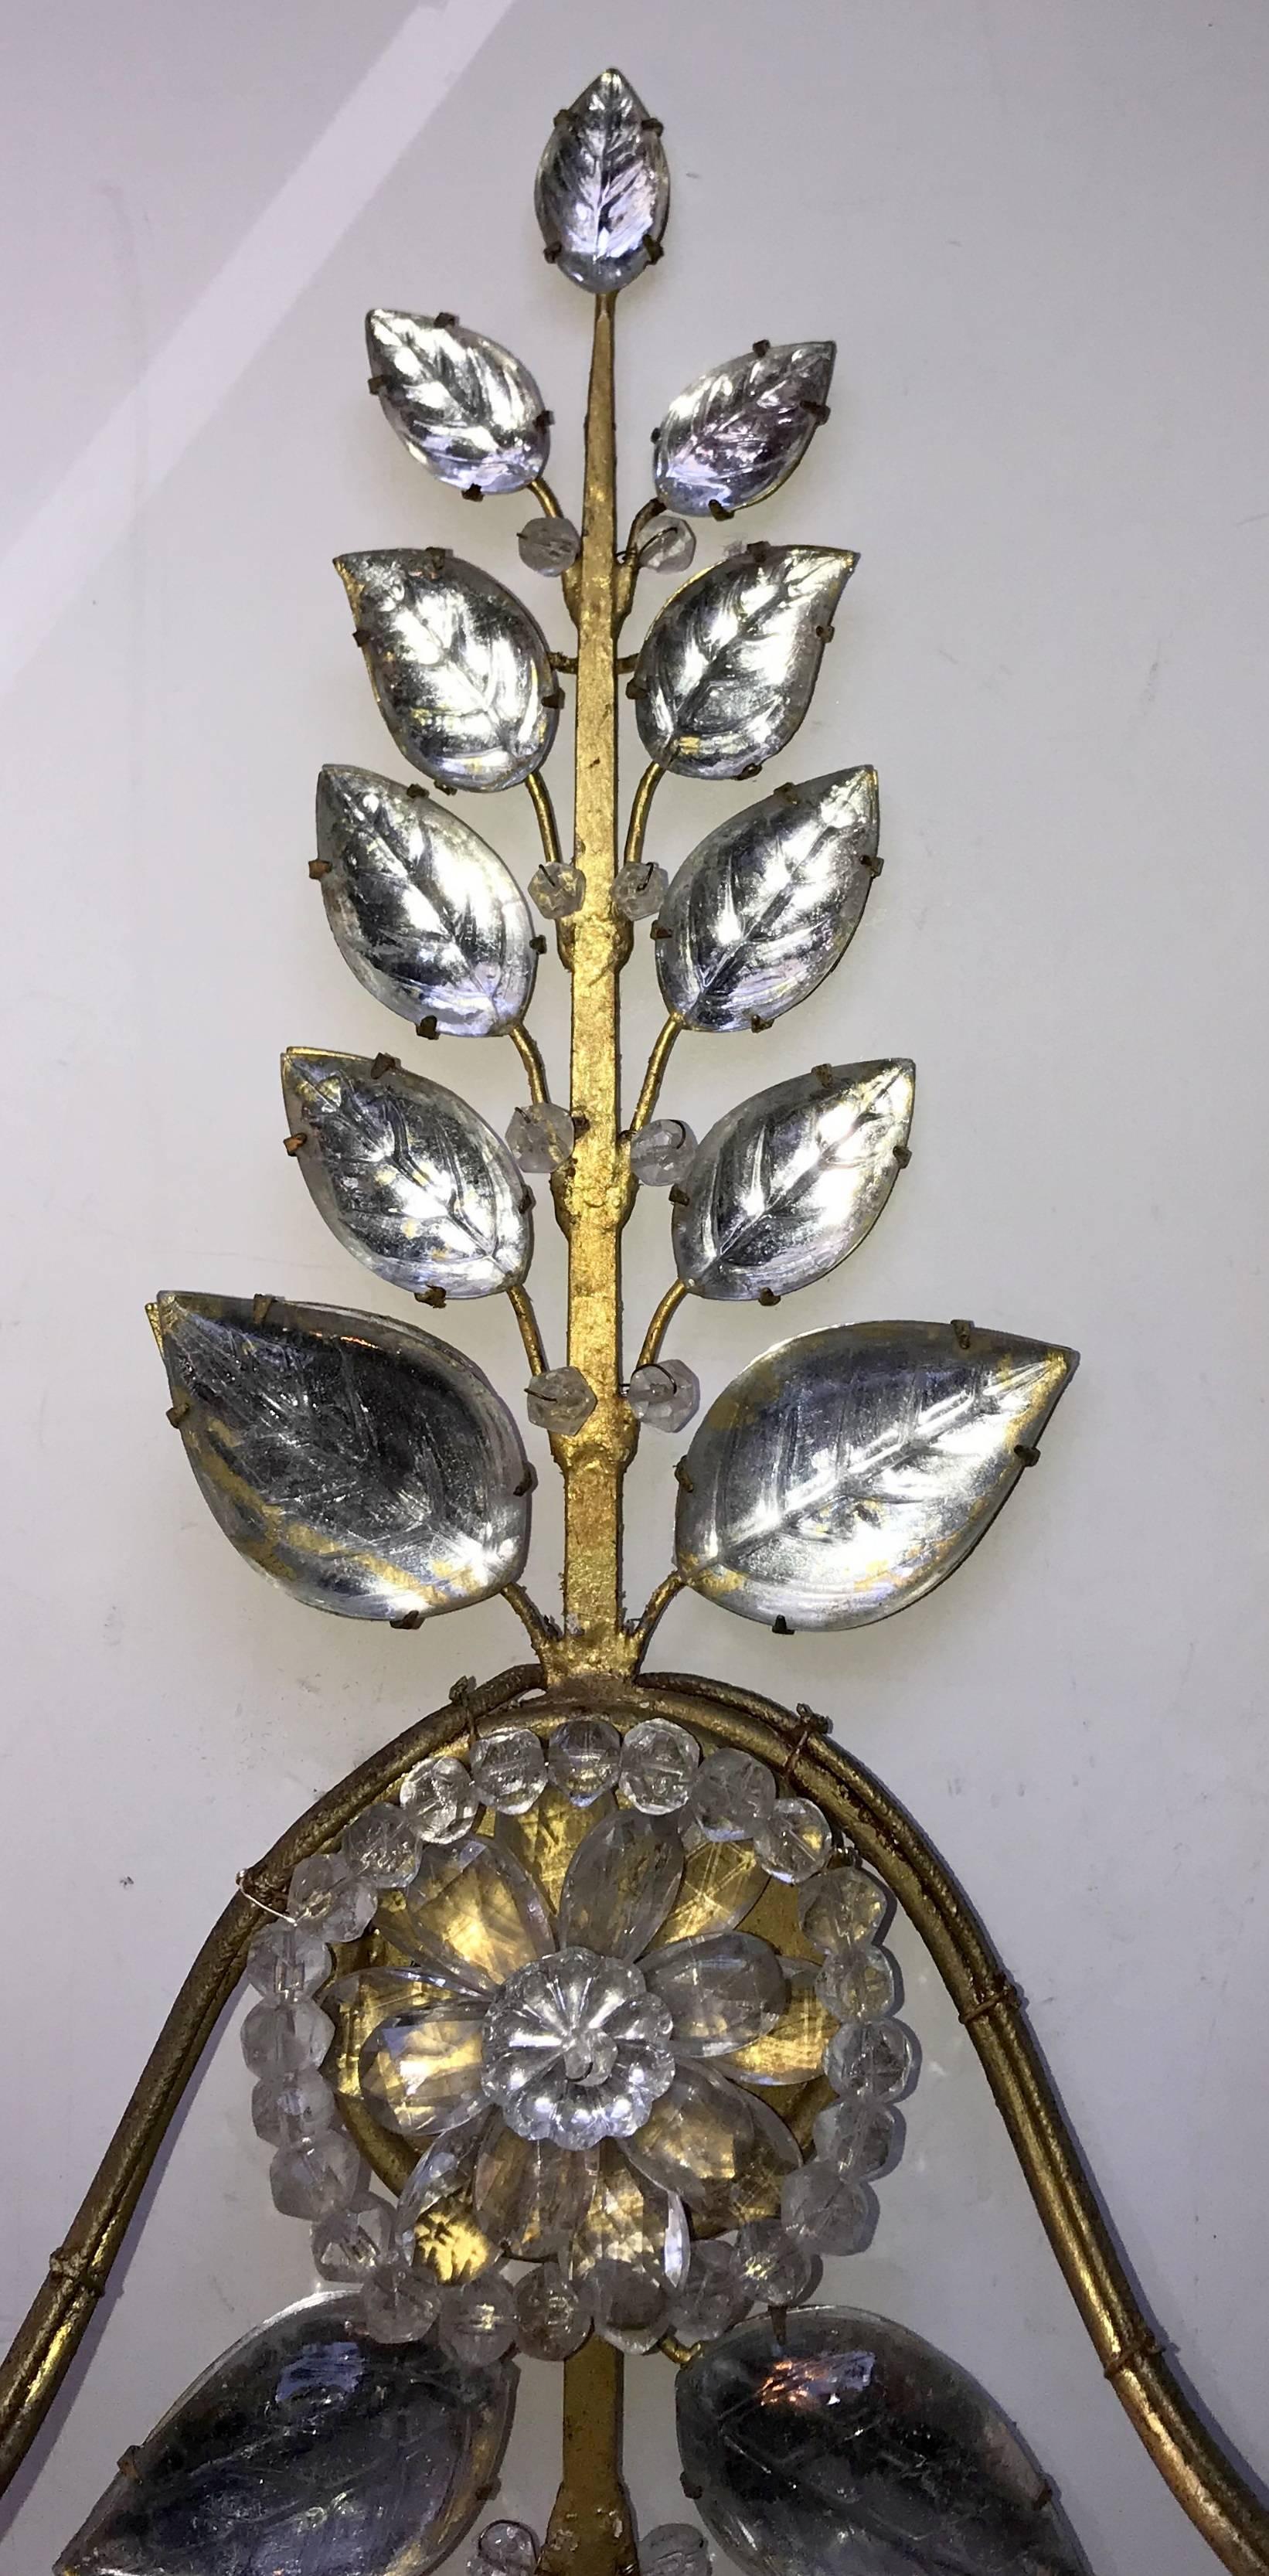 Fabulous Pair Of French Leaf And Flower Medallion Beaded Crystal Gold Gilt Two-Arm Sconces In The Mid Century Modern Manner Of Bagues, Circa 1930s
